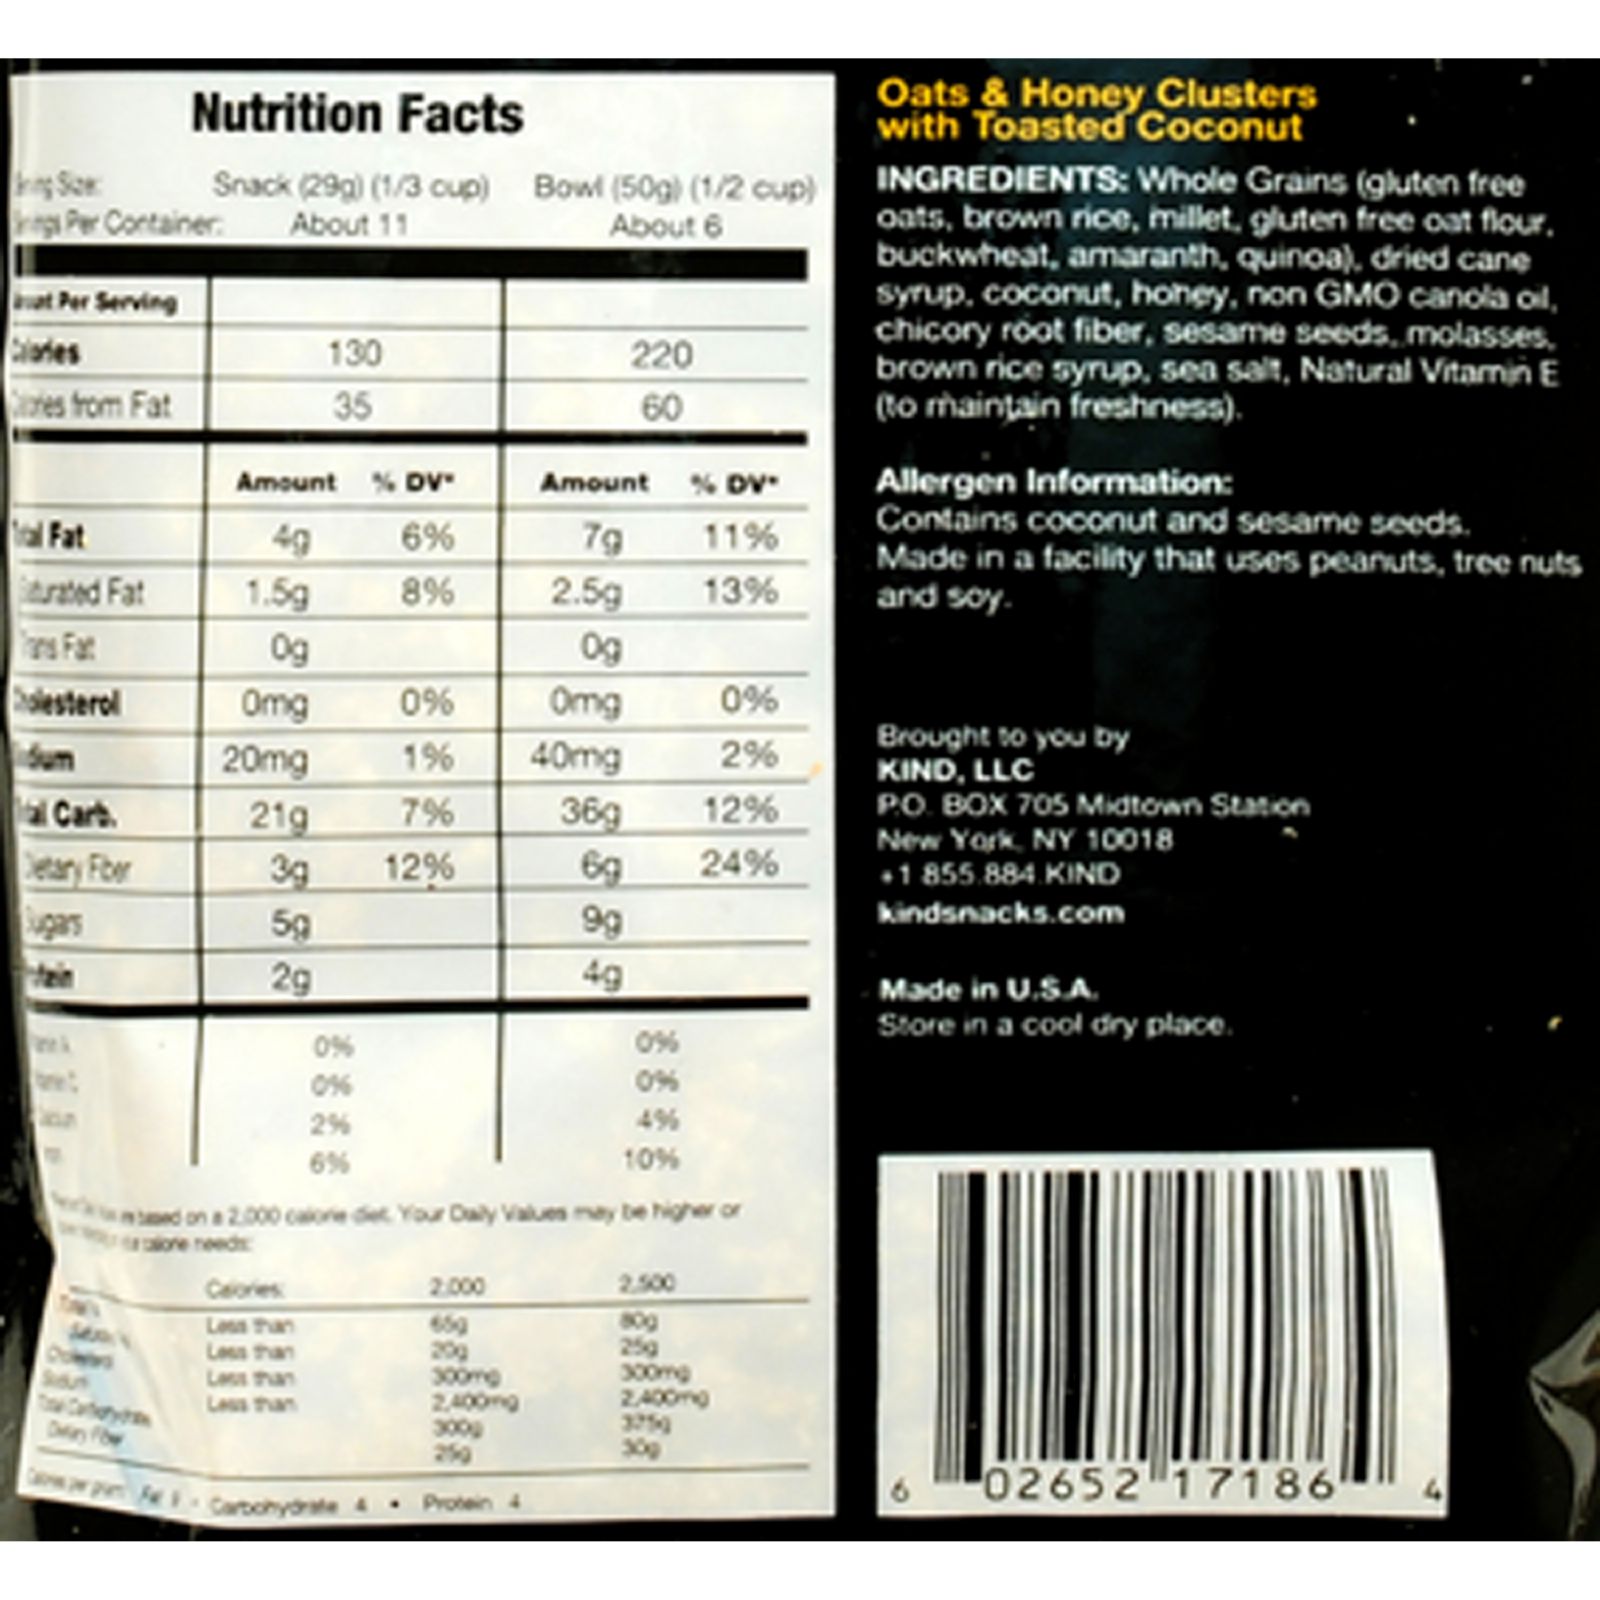 Kind Healthy Grains Oats and Honey Clusters with Toasted Coconut - 11 oz - 6개 묶음상품